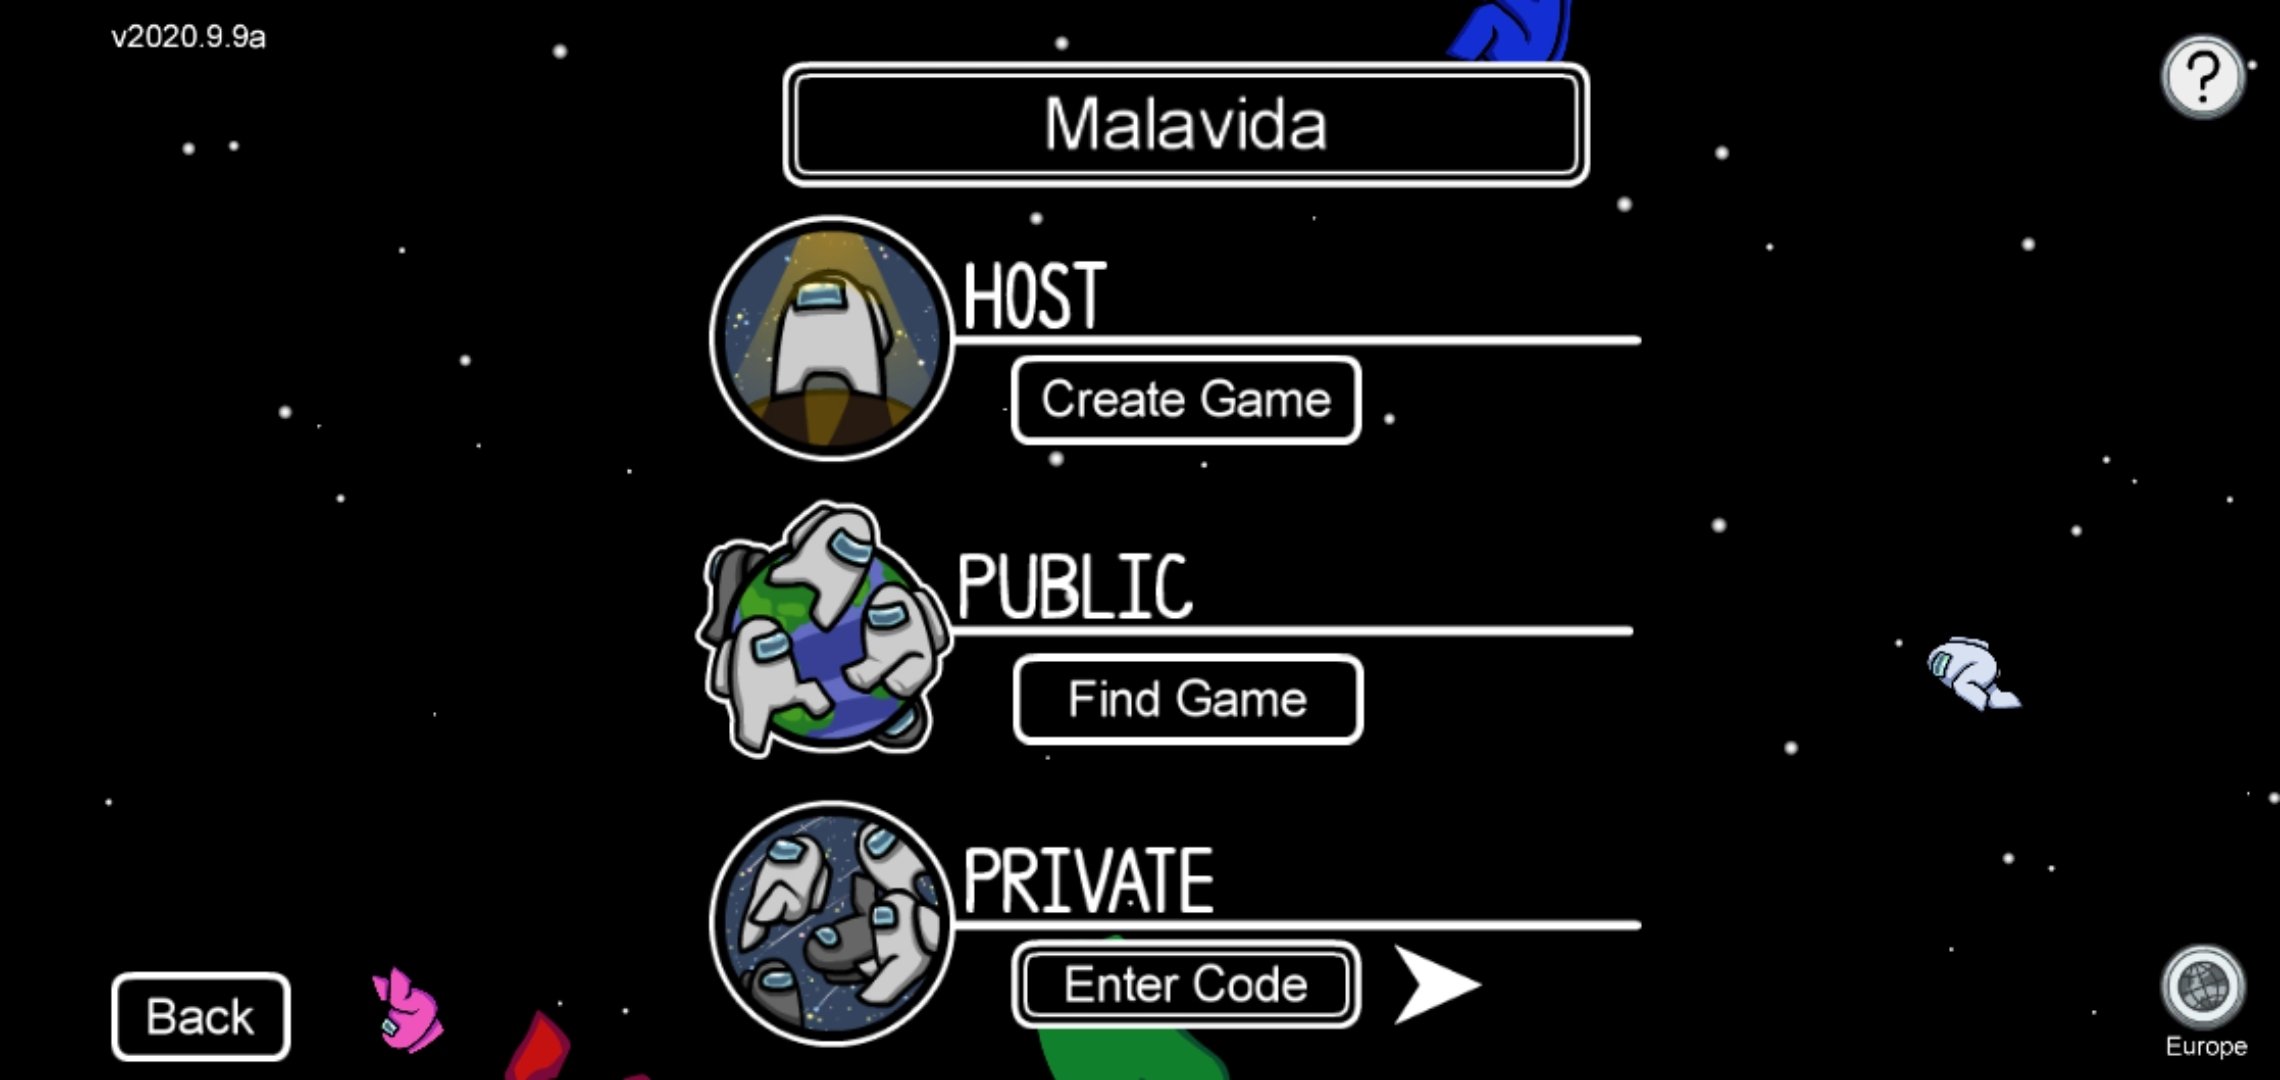 Among Us Mod Menu Android / IOS, Always Imposter